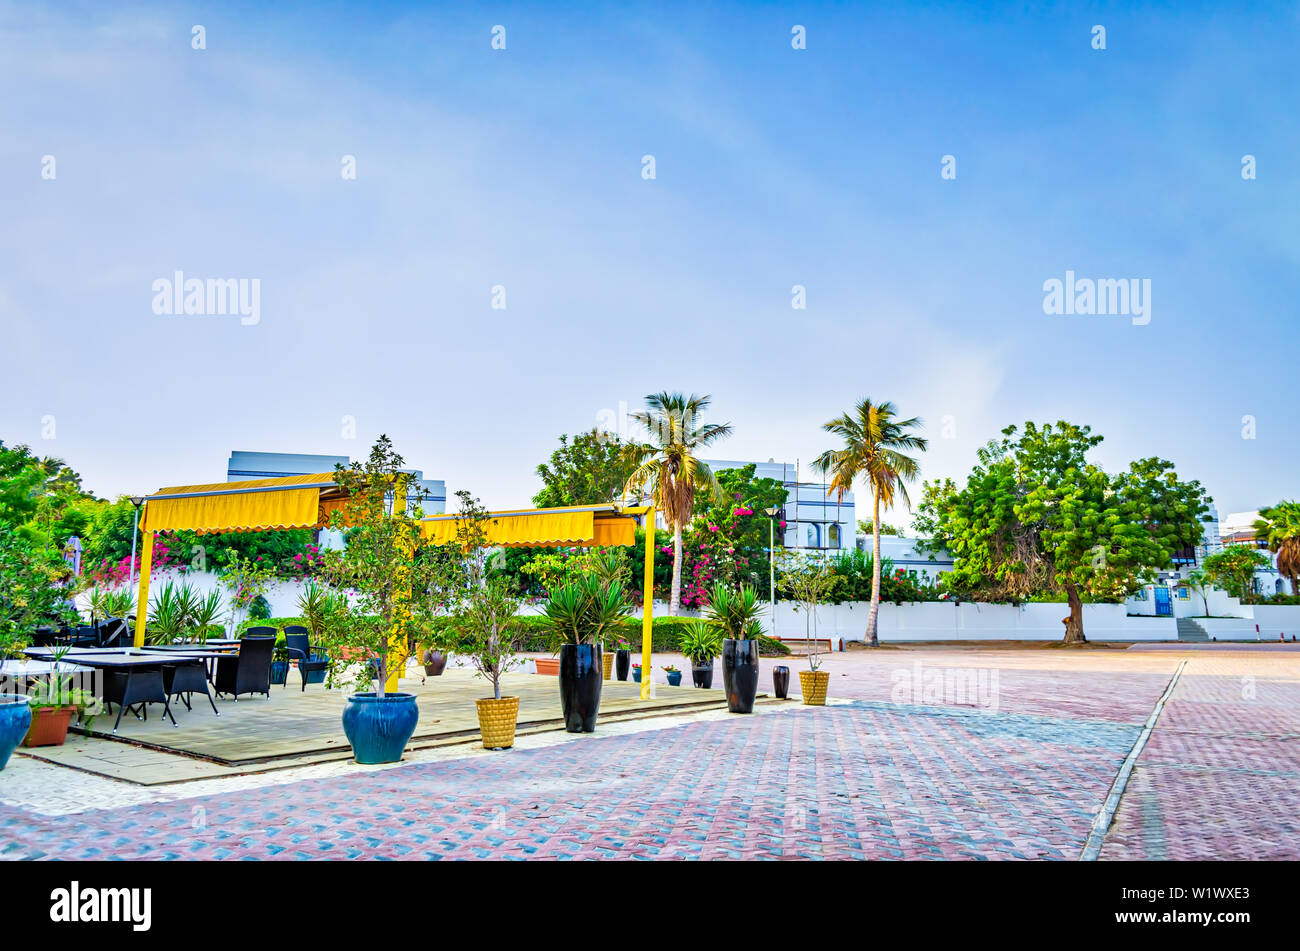 Small beach restaurant in yellow shades on the pavement surrounded by greenery. From Muscat, Oman. Stock Photo